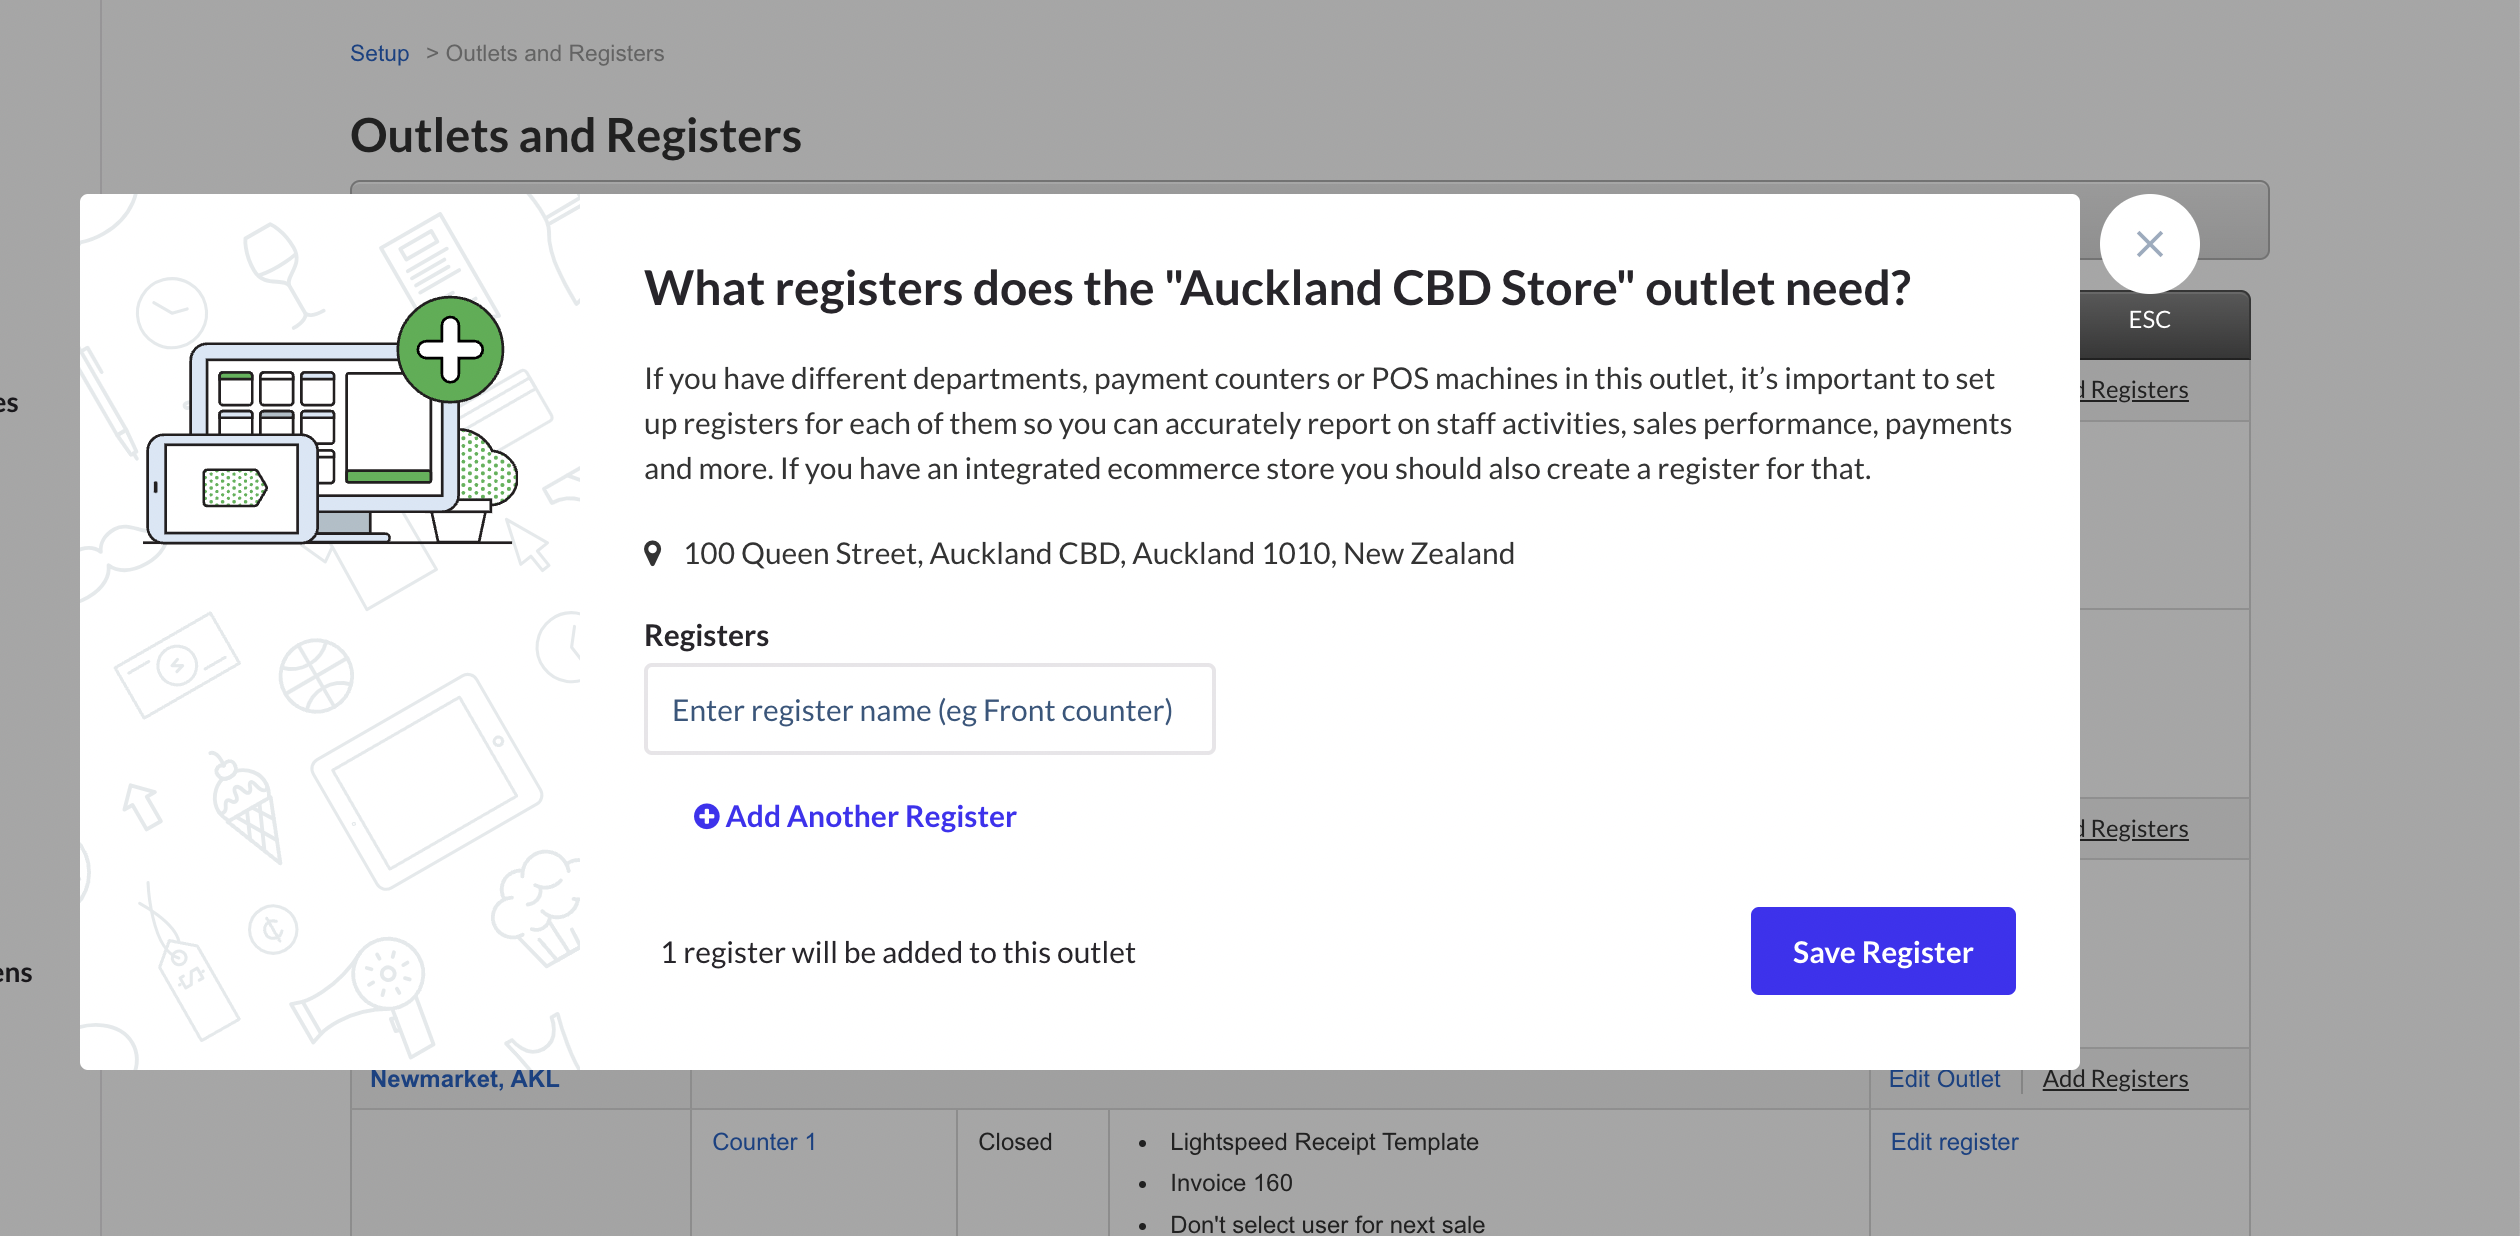 A pop up on the Outlets and Registers page asking What registers does the outlet need? with Registers input field and option to Add another register.